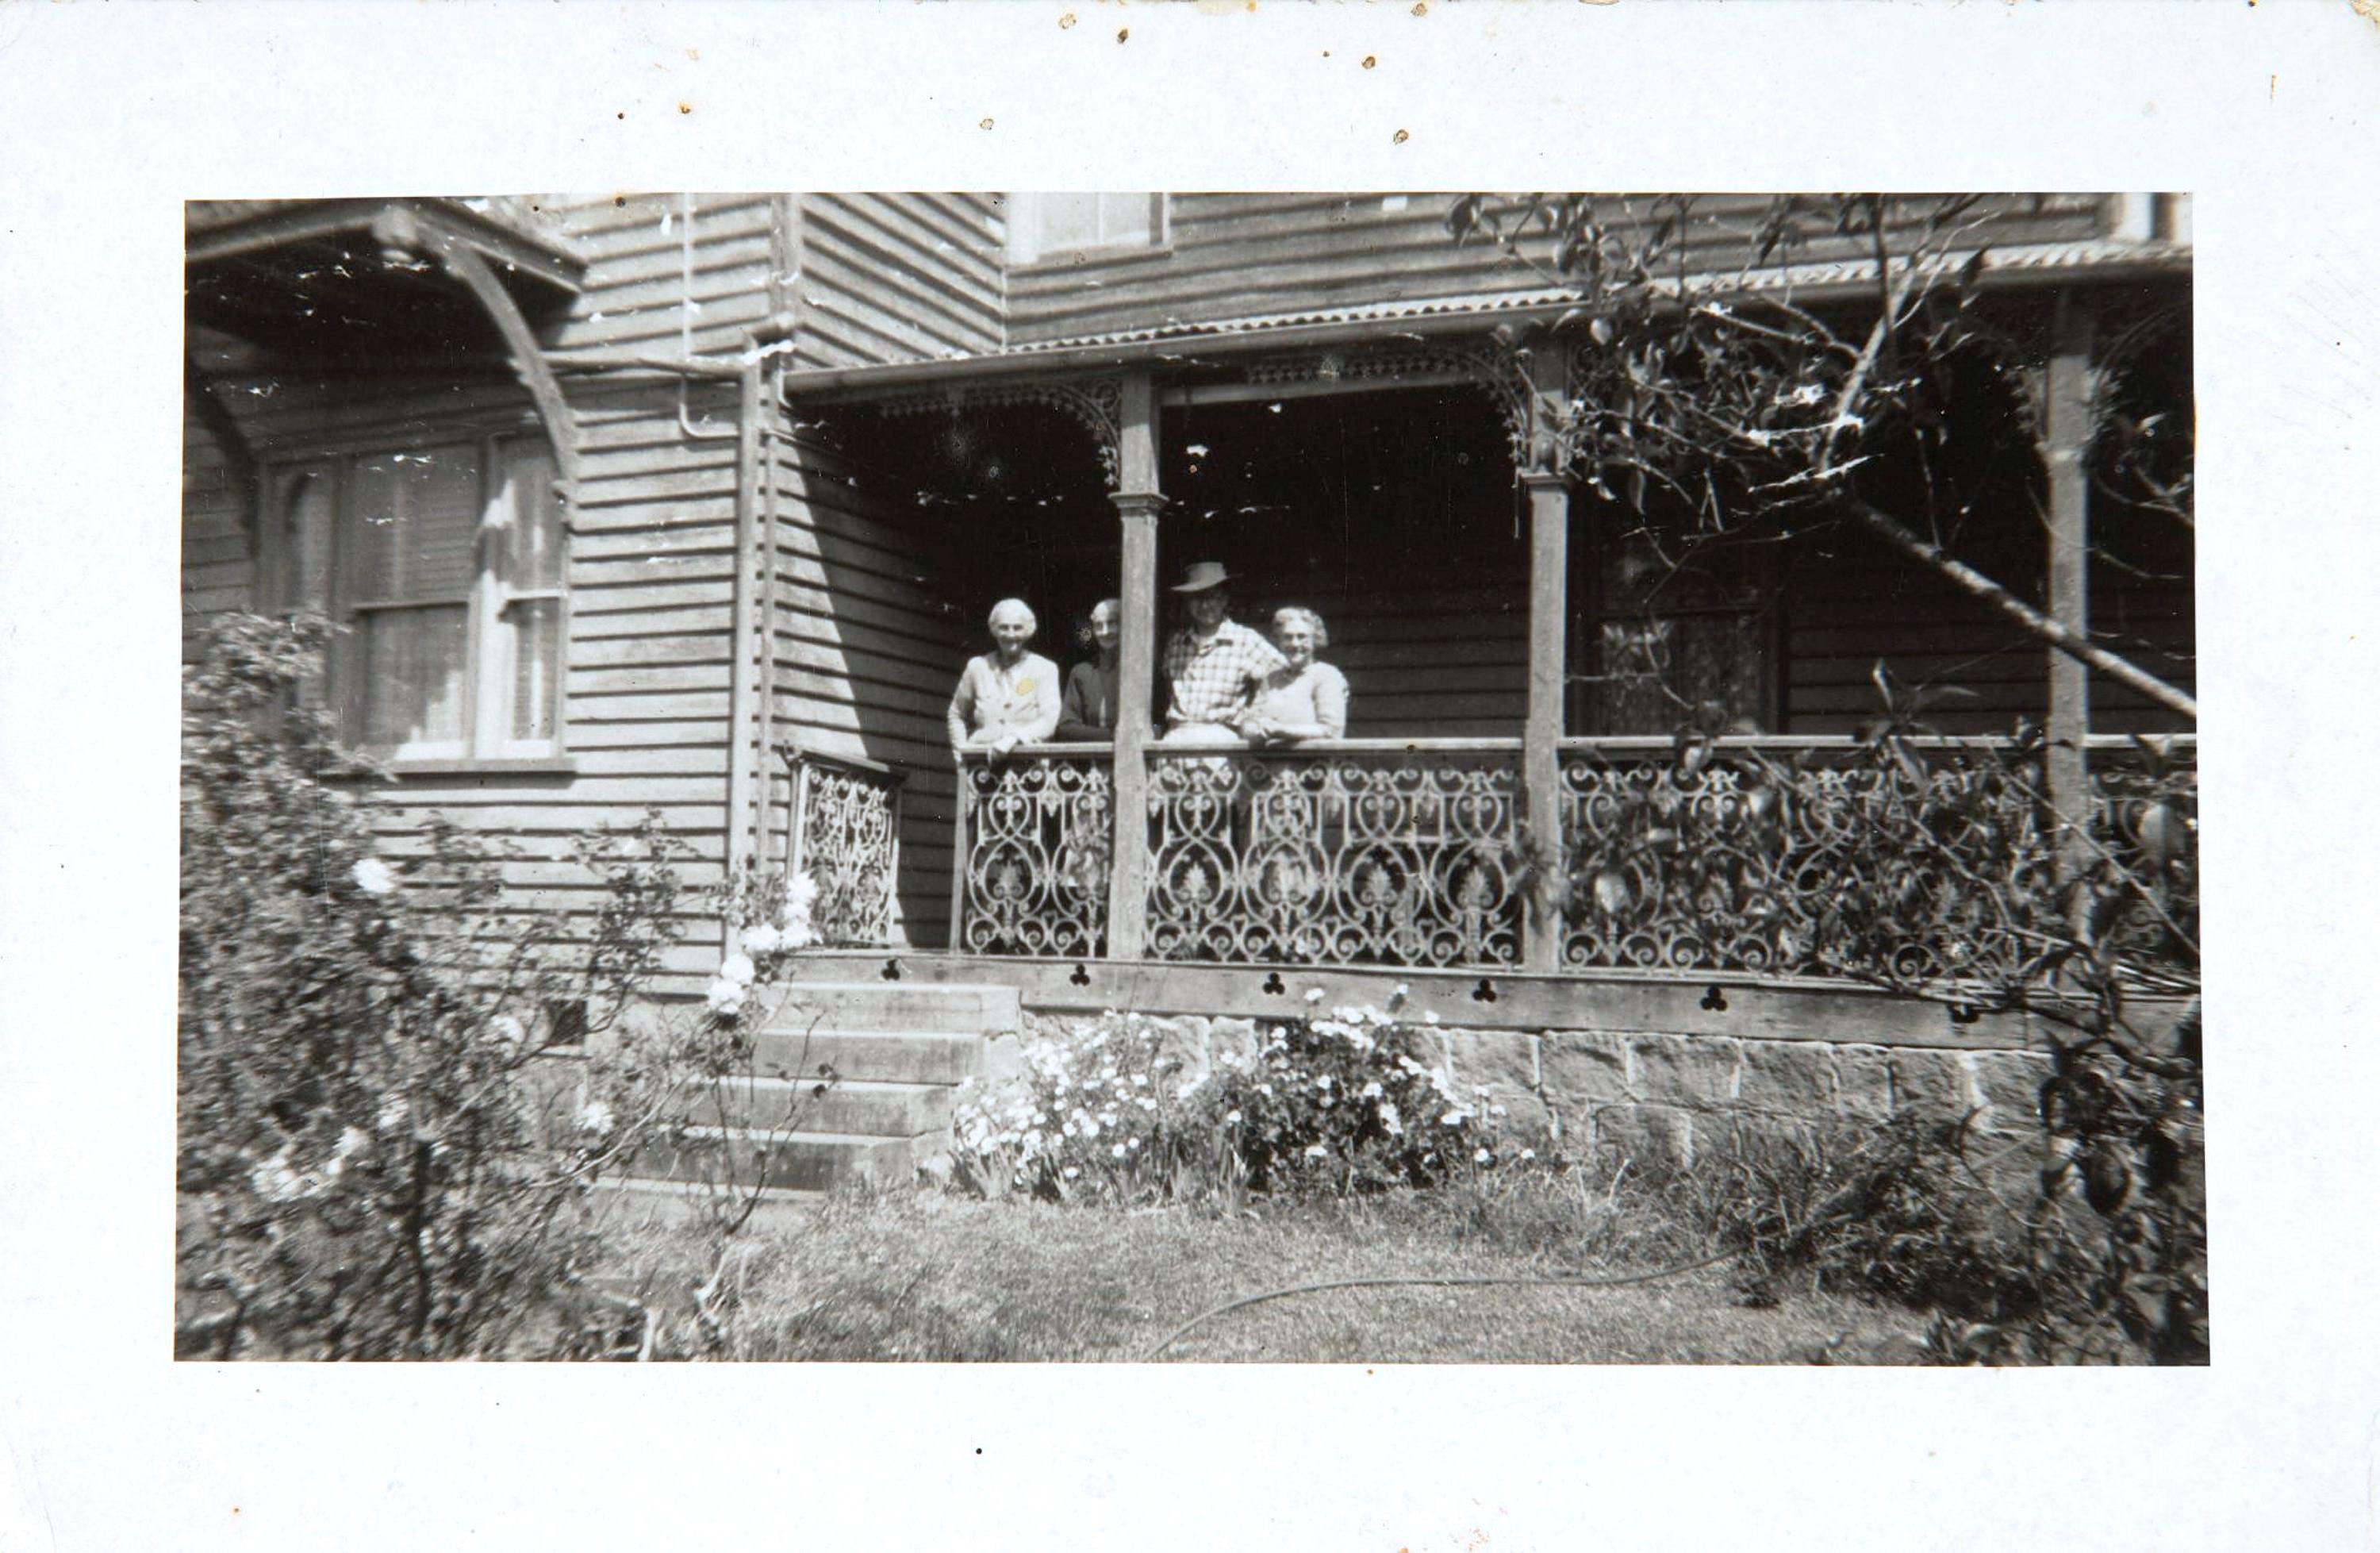 Macgregor sisters on the side verandah at Meroogal, Nowra, around 1958 / photographer unknown